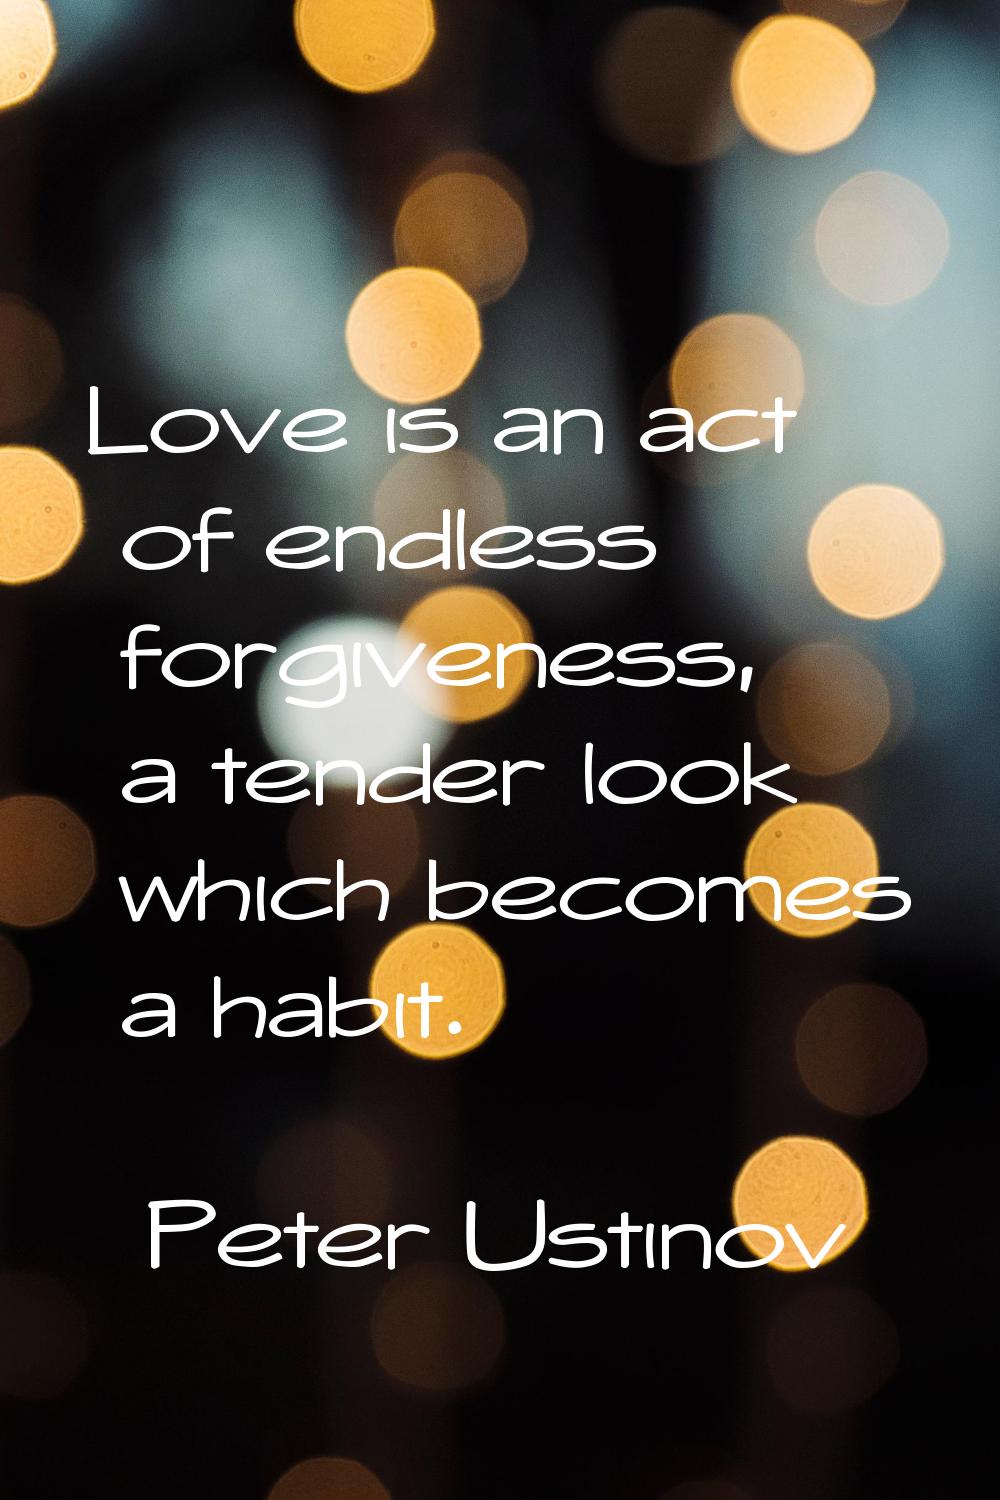 Love is an act of endless forgiveness, a tender look which becomes a habit.